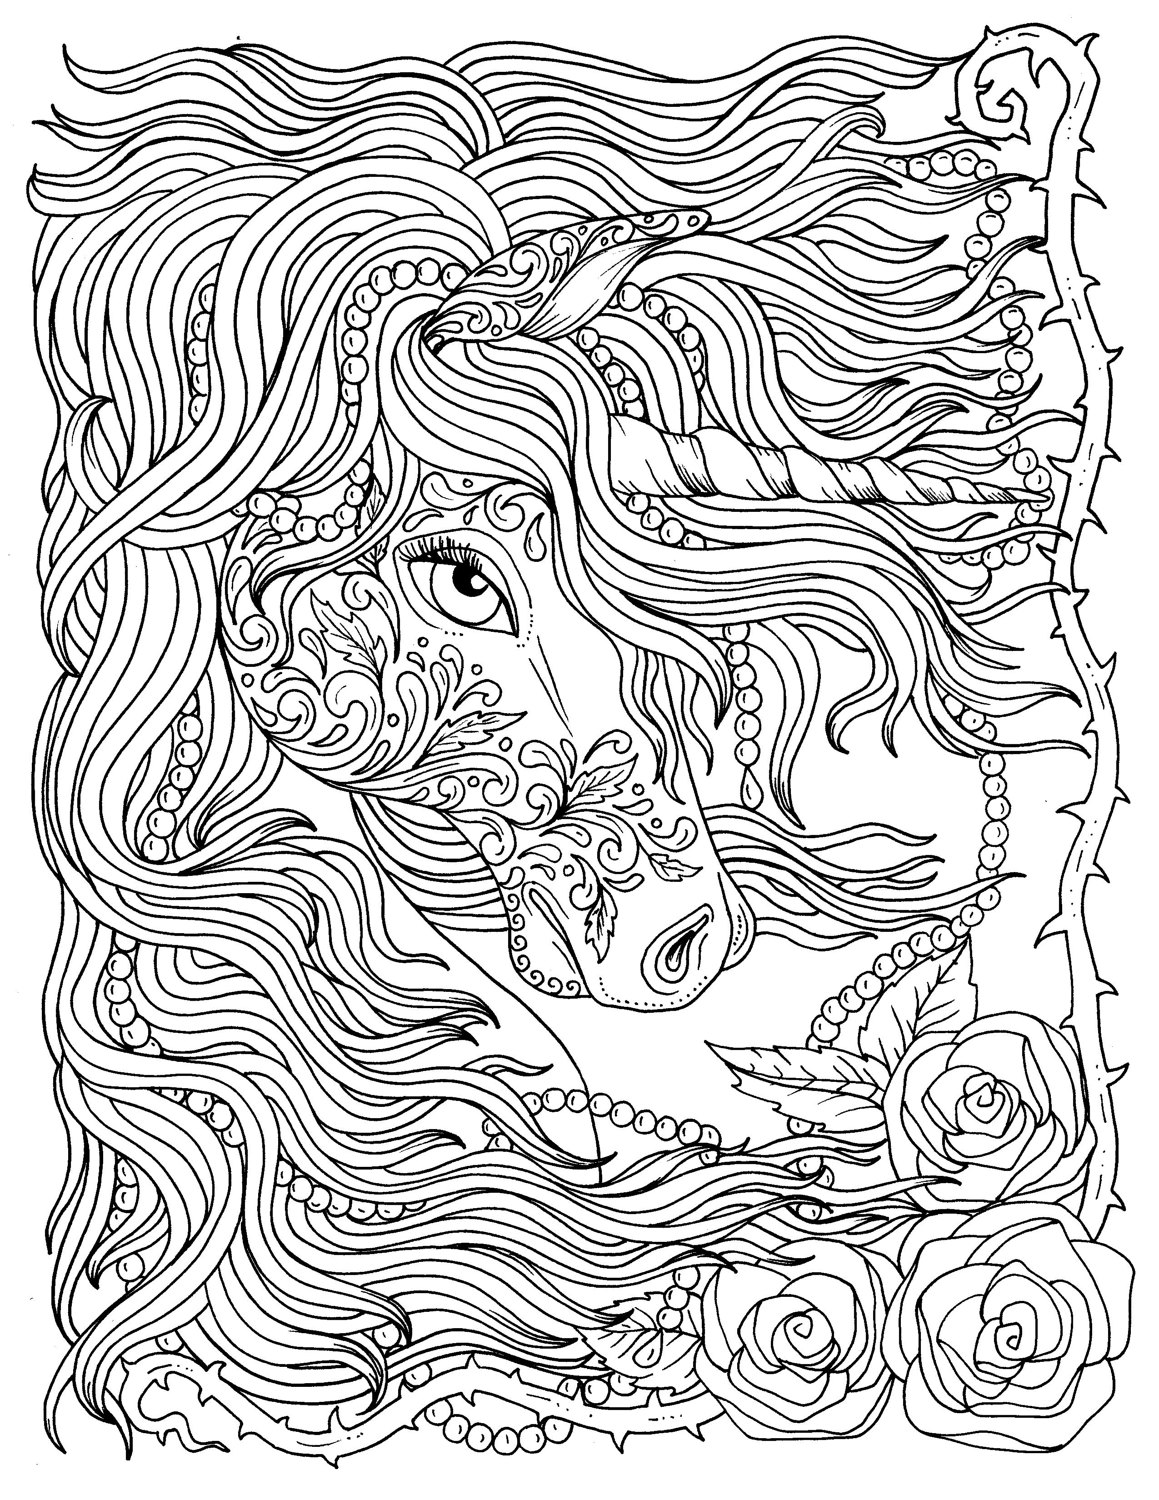 Unicorn and Pearls Fantasy Coloring Page Adult Coloring | Etsy